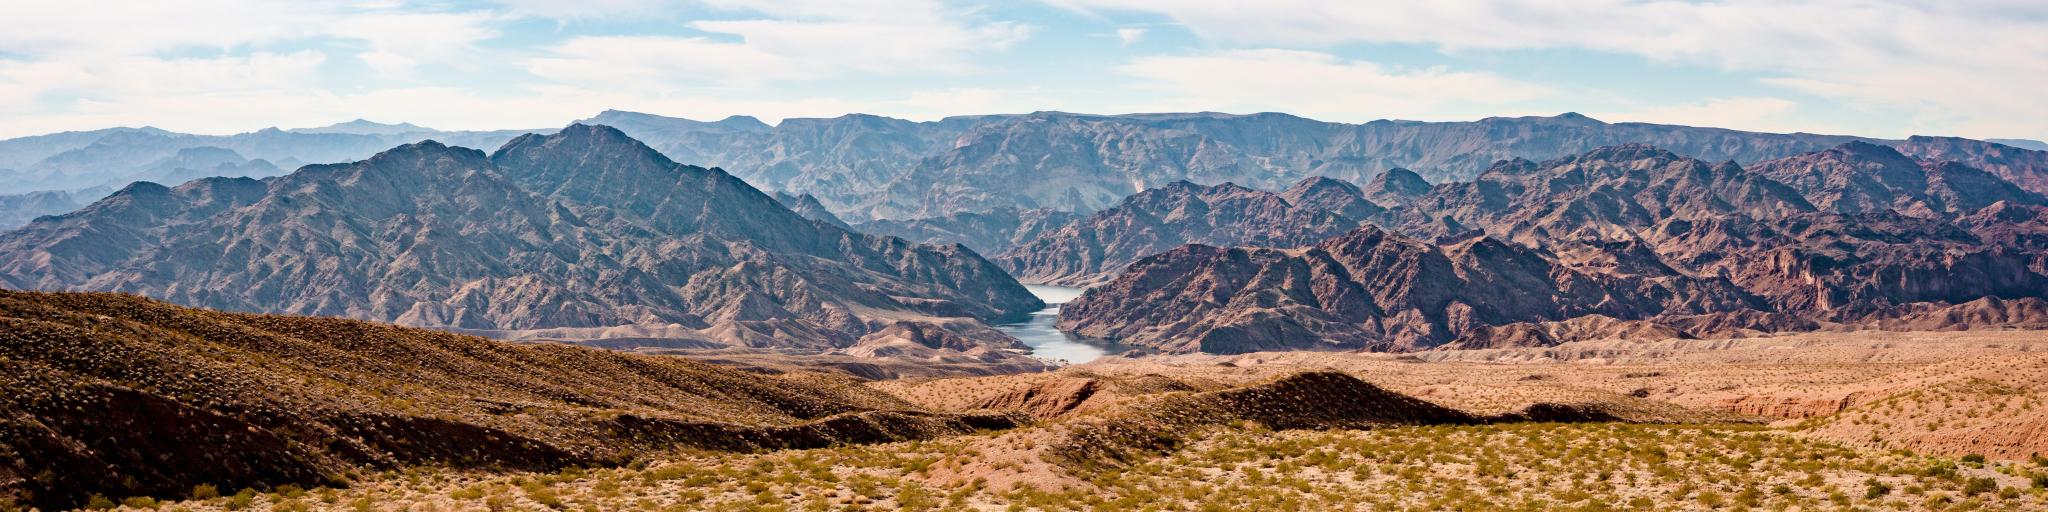 Panoramic view of Willow Beach, at the Colorado River in Lake Mead National Recreation Area, Arizona